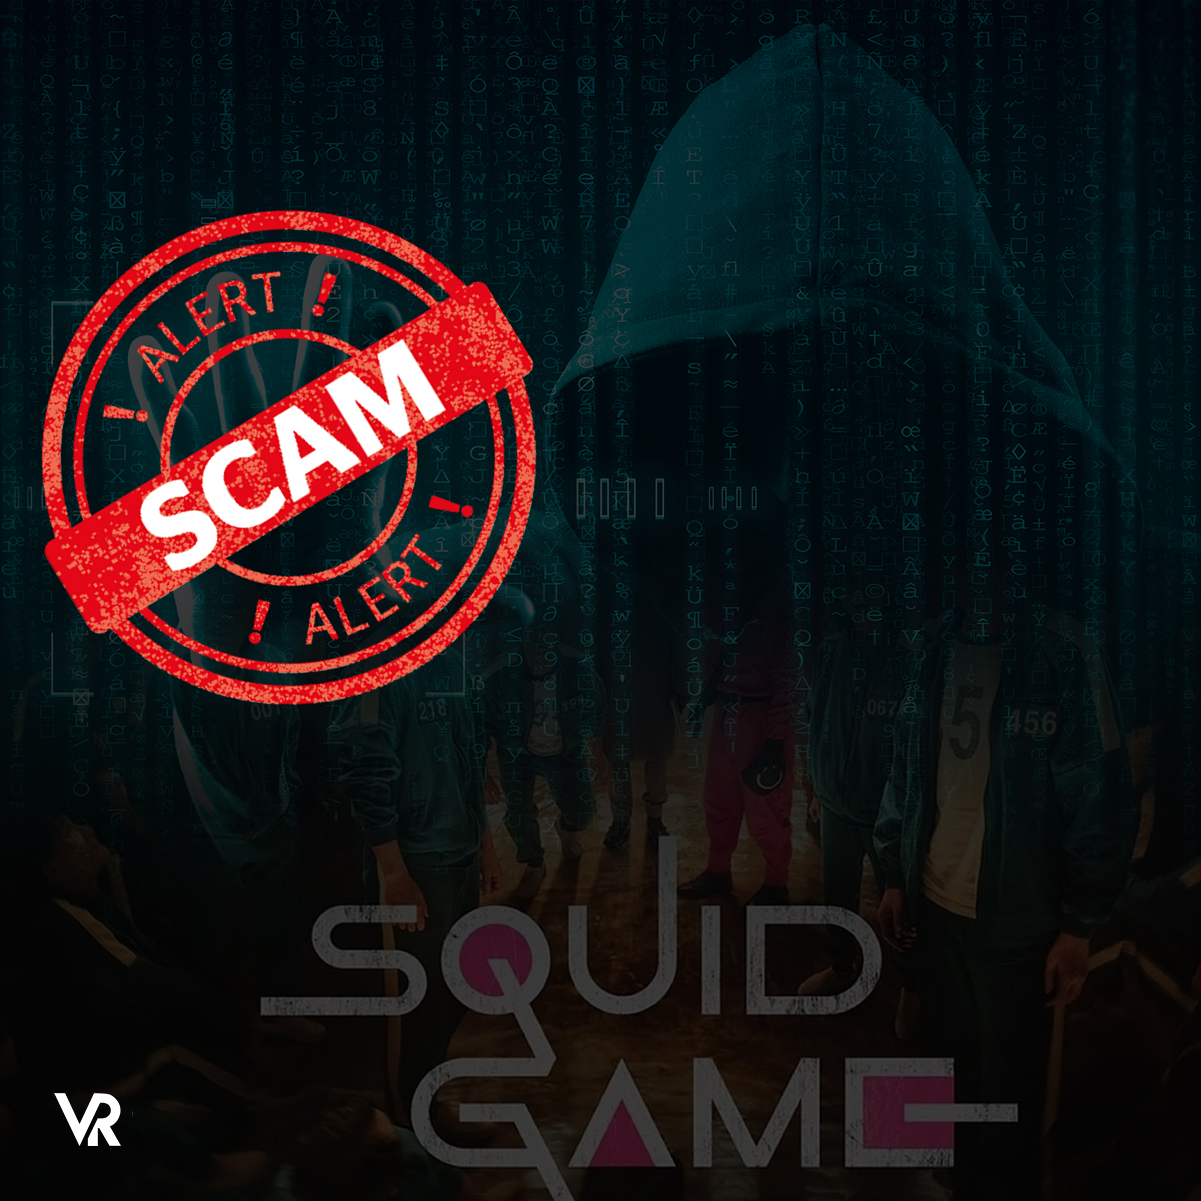 Squid Game crypto coin promoters vanish with investor millions in rug pull scam